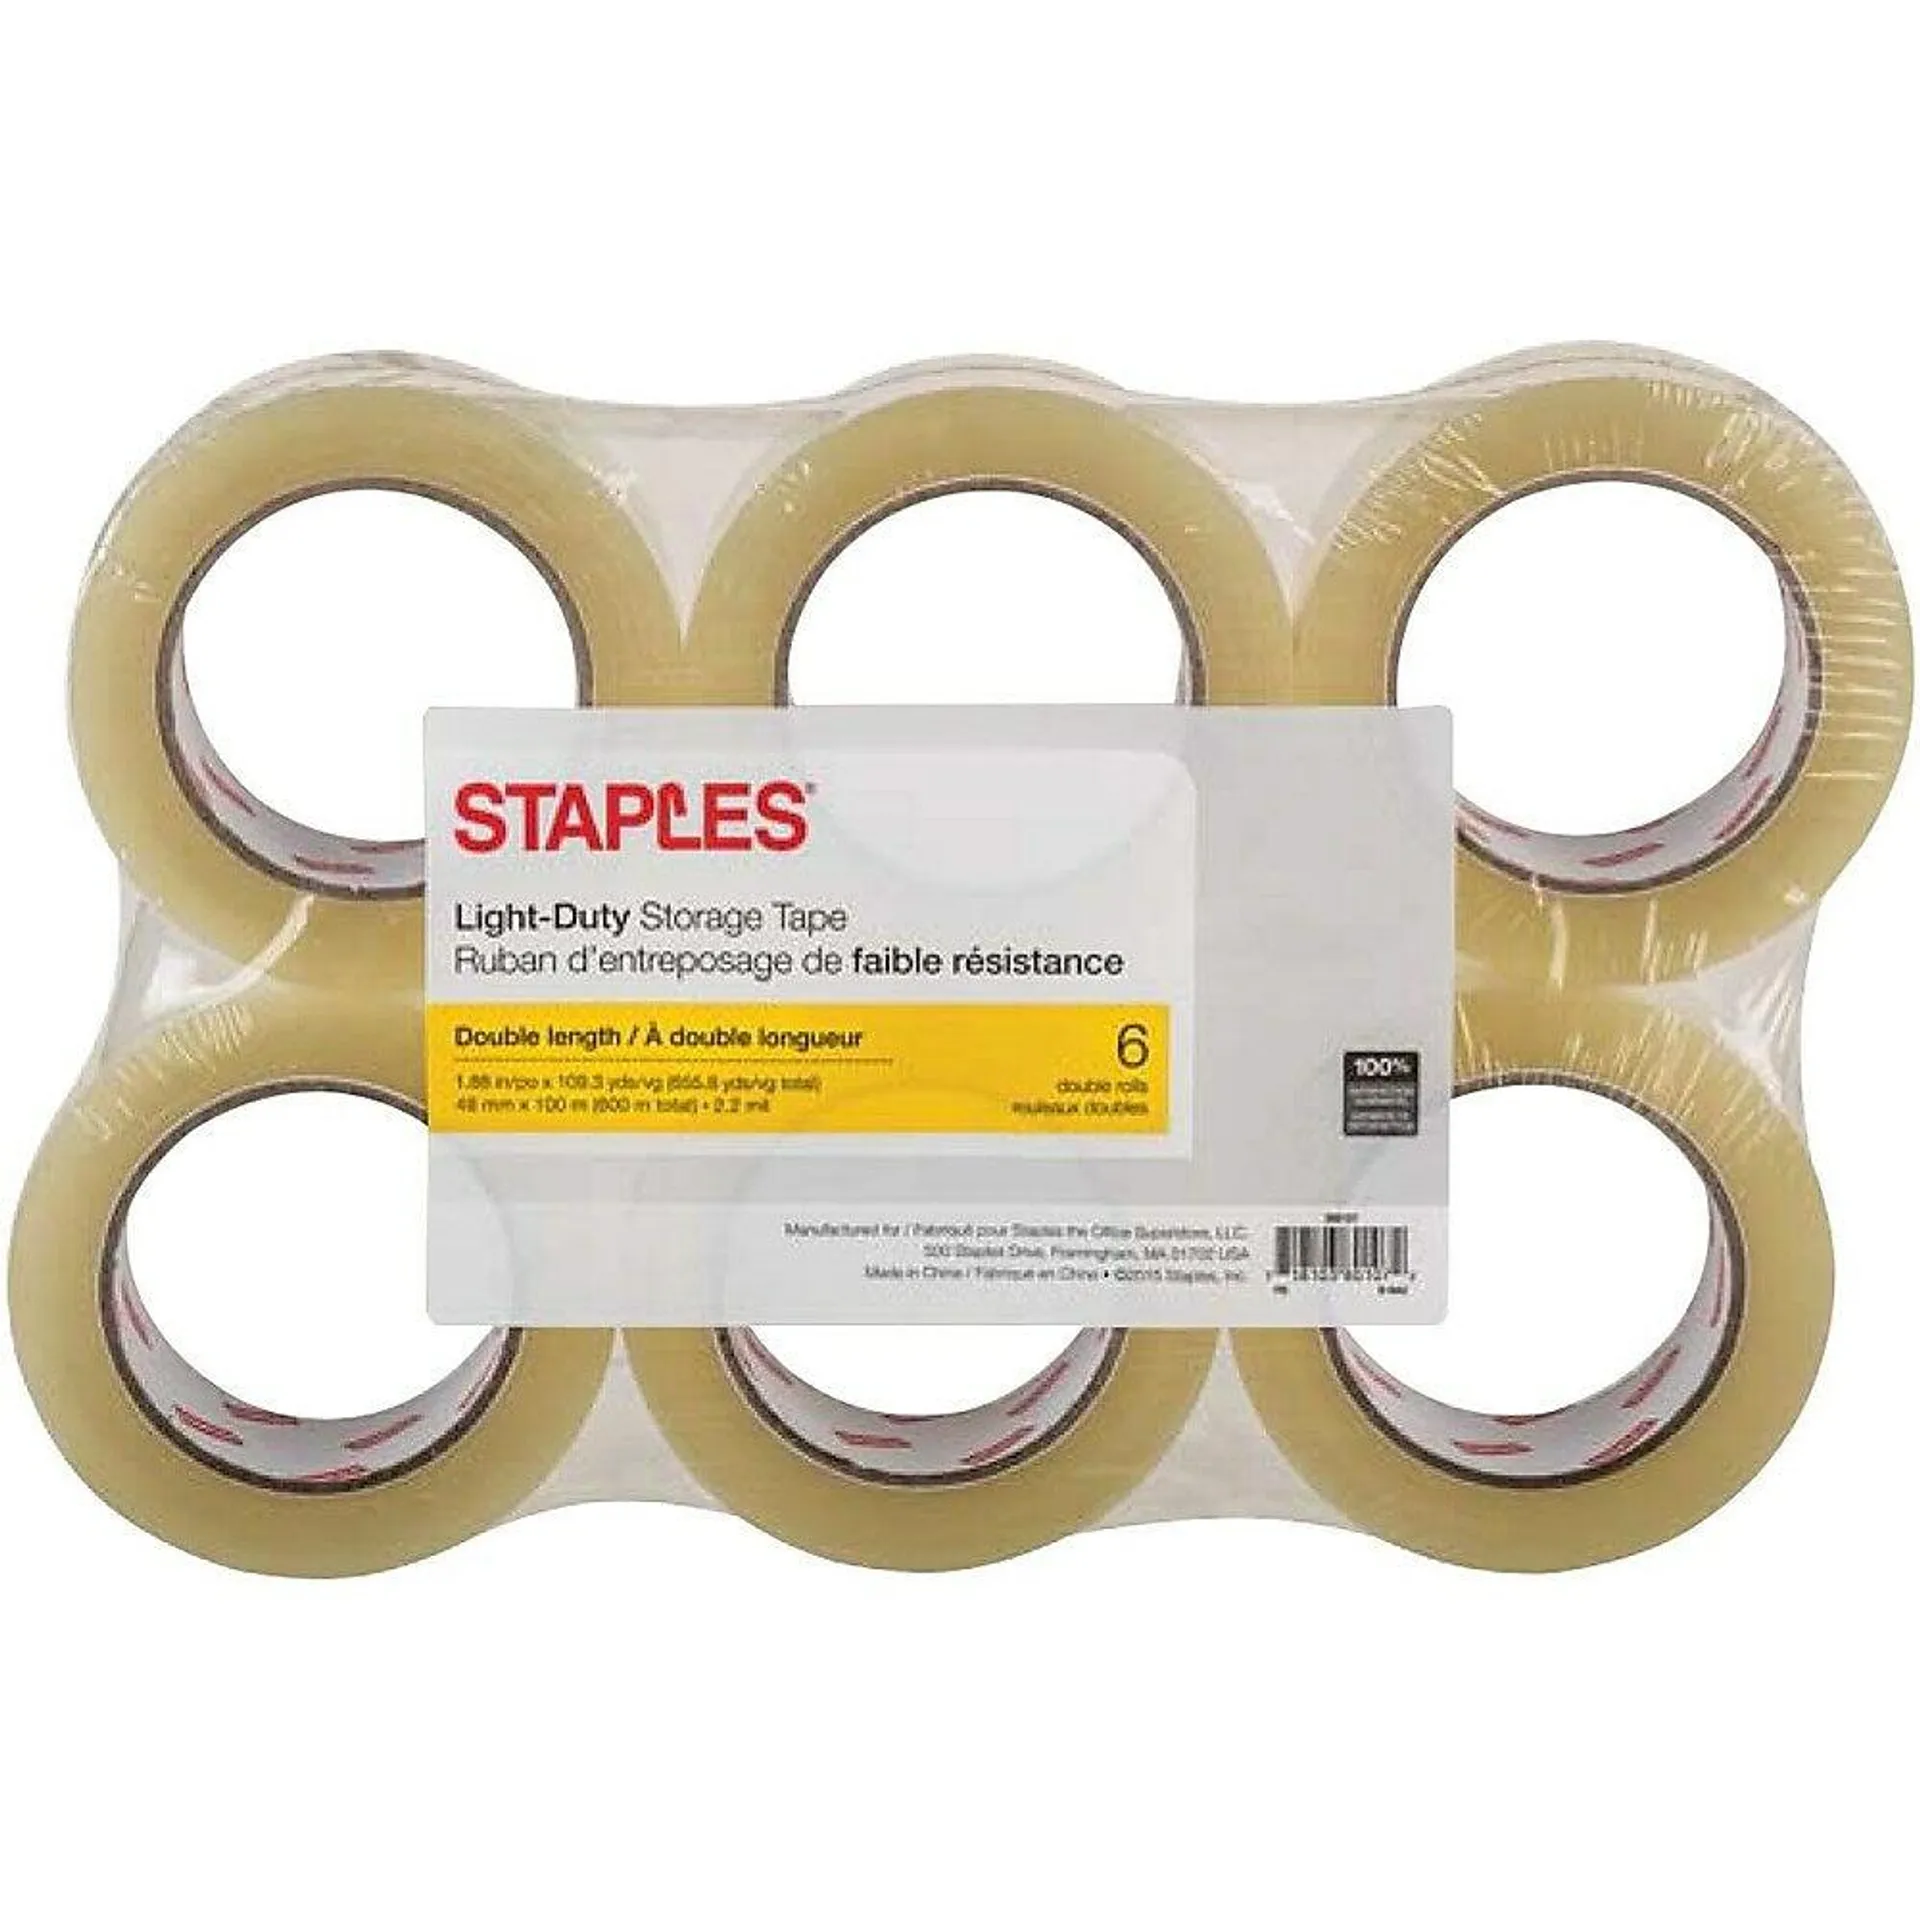 Staples Double-Length Packaging Tape, 48 mm x 100m, 2.2-mil, 6 Pack